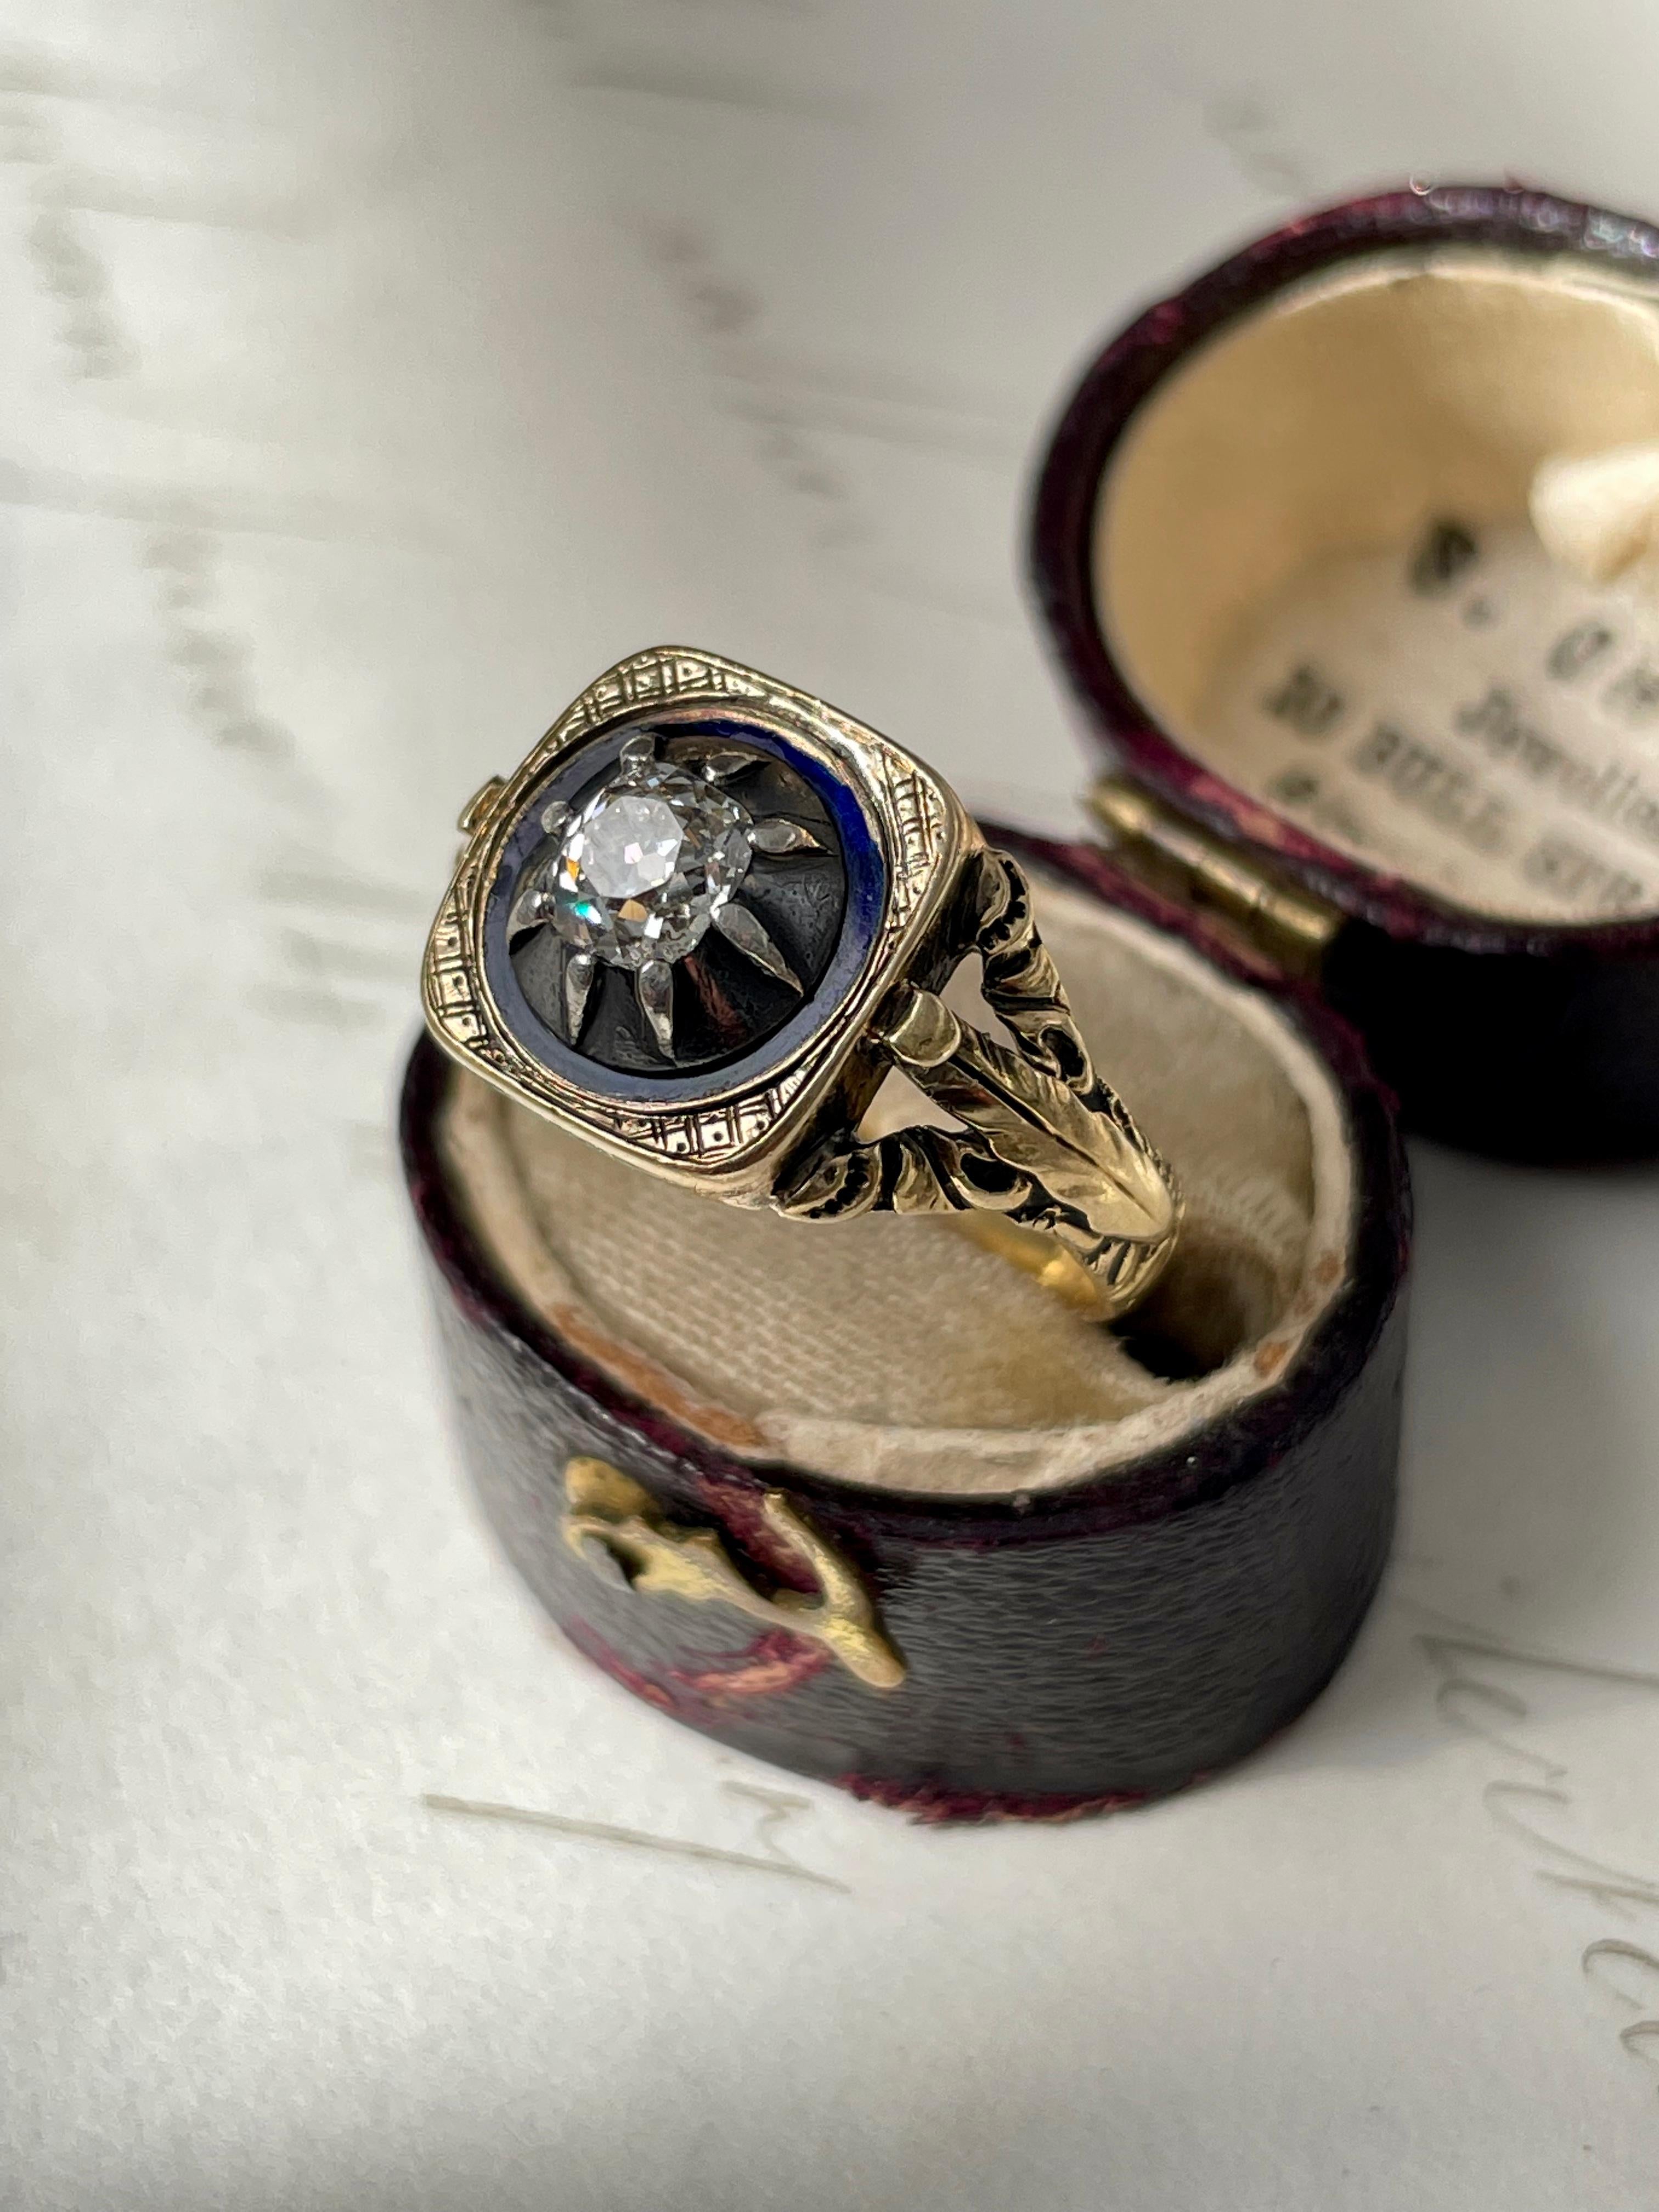 This romantic early 19th century ring has been artfully designed and lightly hand fabricated in 18k gold and silver. A gleaming .50 carat old cushion-cut diamond is mounted in a raised darkened silver collet, encircled by a cobalt blue enamel